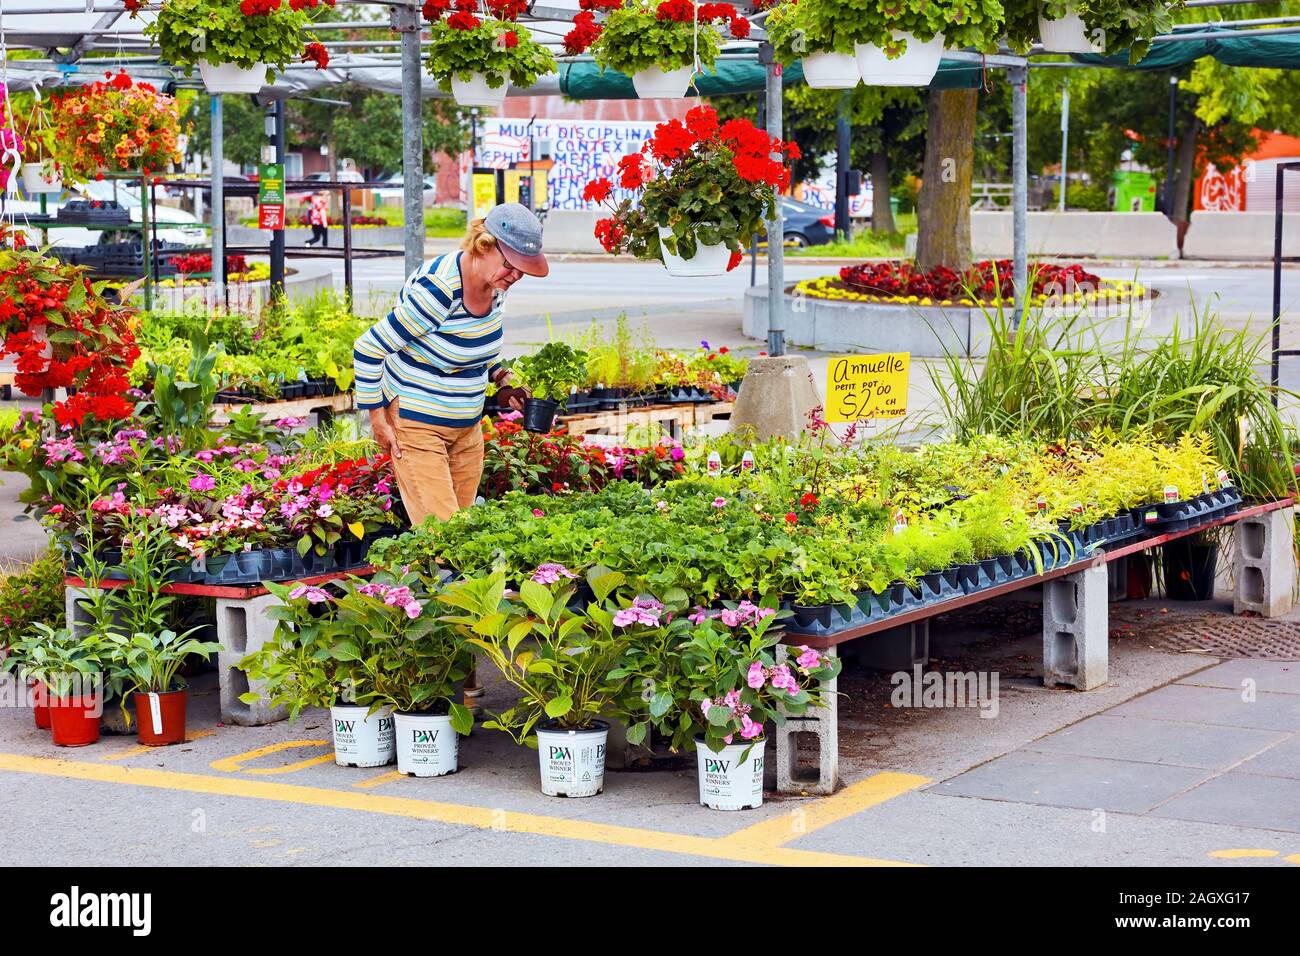 Montreal, Canada - June, 2018: Elderly woman looking at the plants and flowers on the stall of an outdoor flower shop at Atwater market in Montreal Stock Photo